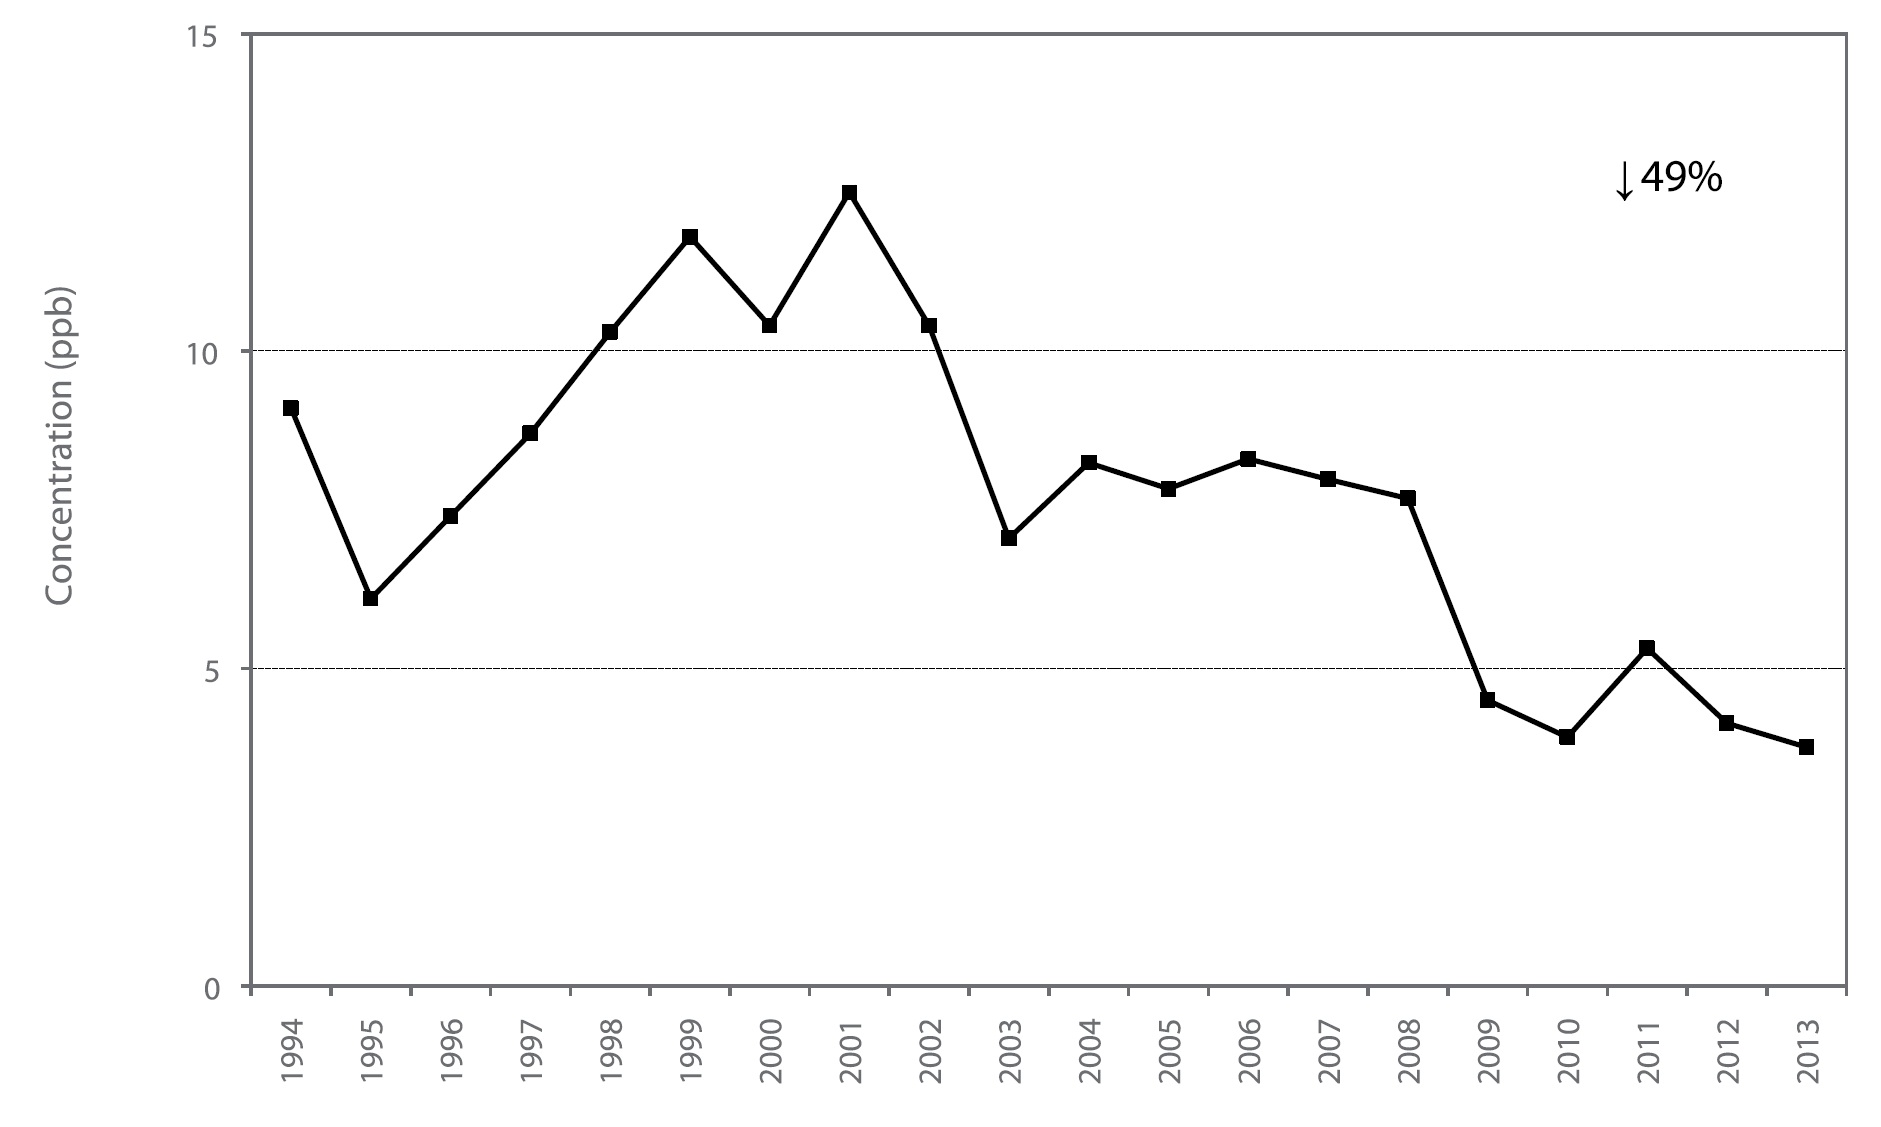 Figure A43 is a line chart displaying the sulphur dioxide annual mean at Sarnia from 1994 to 2013. Over this 20-year period, sulphur dioxide decreased 49%.